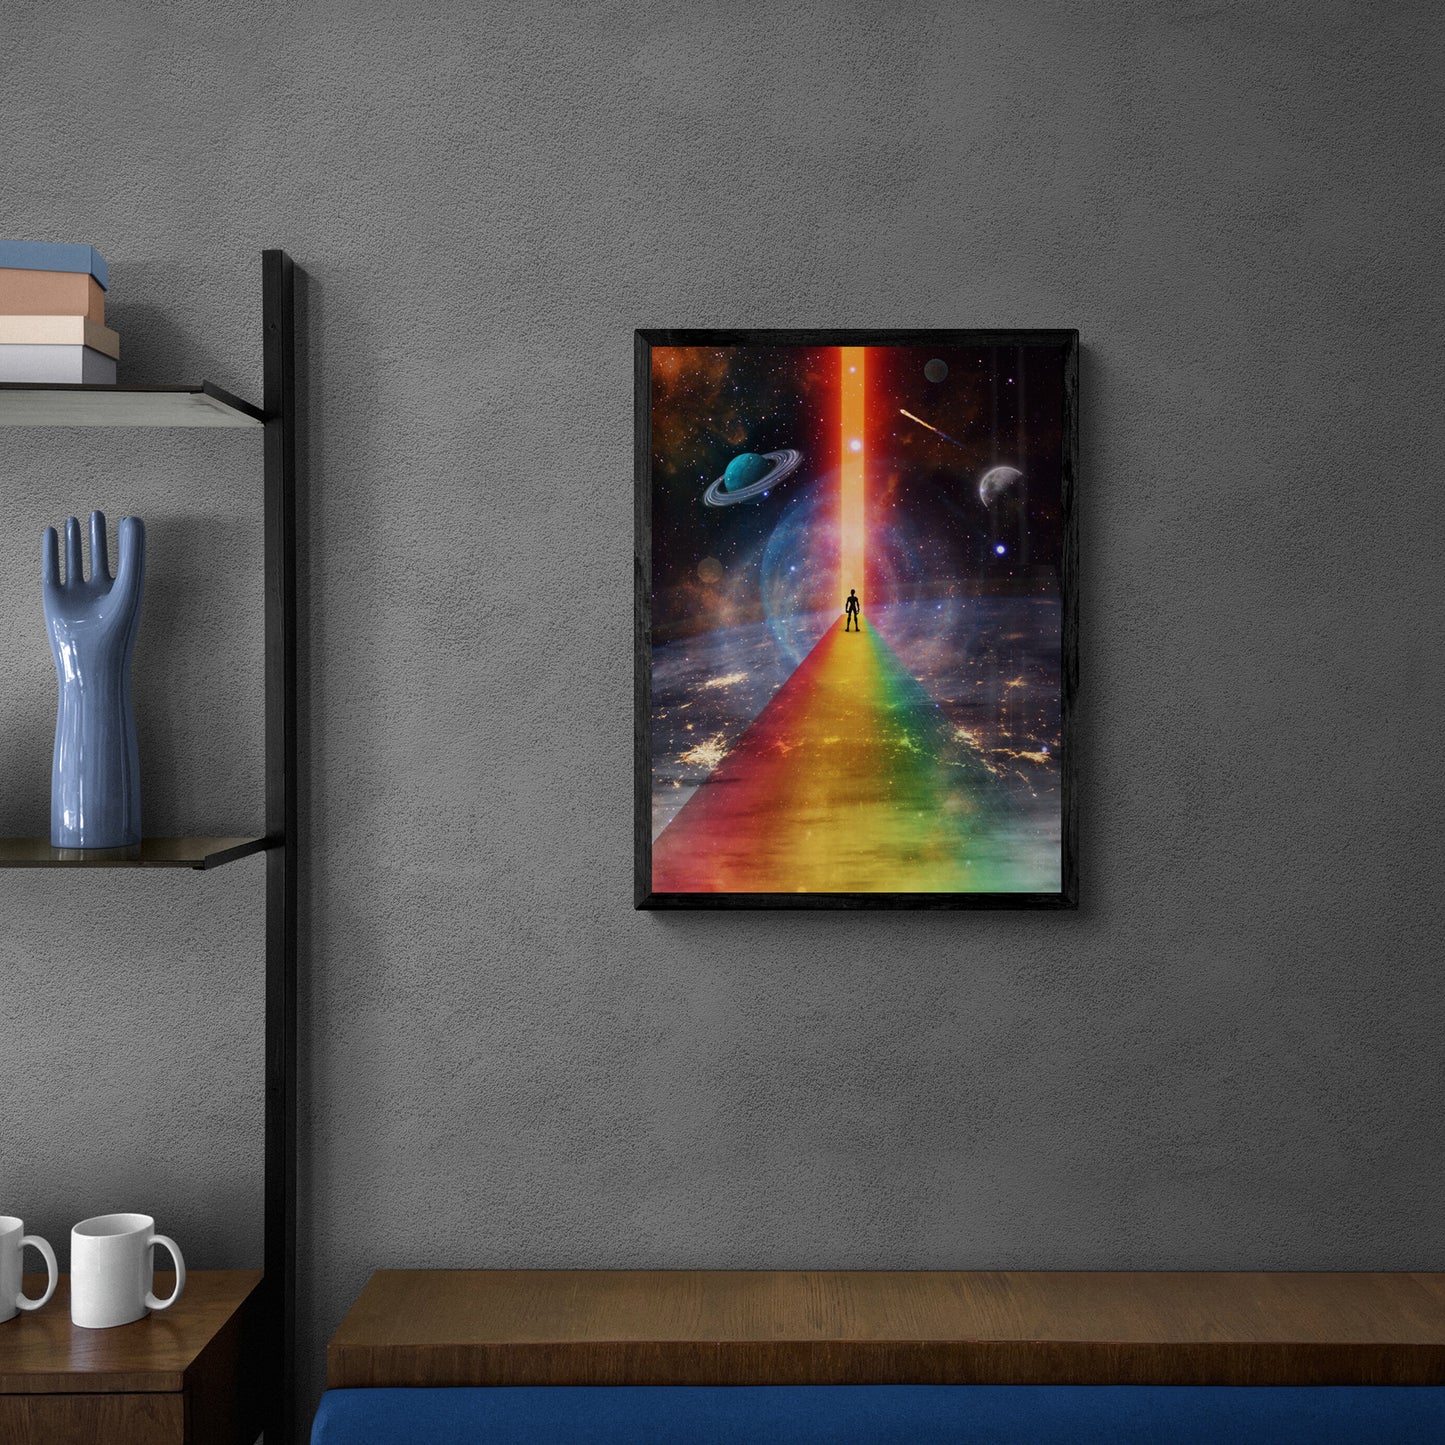 Becoming Eternal 18X24 Inch Poster Print for Sci-Fi & Surreal Art Fans, great gift for home decor and room design